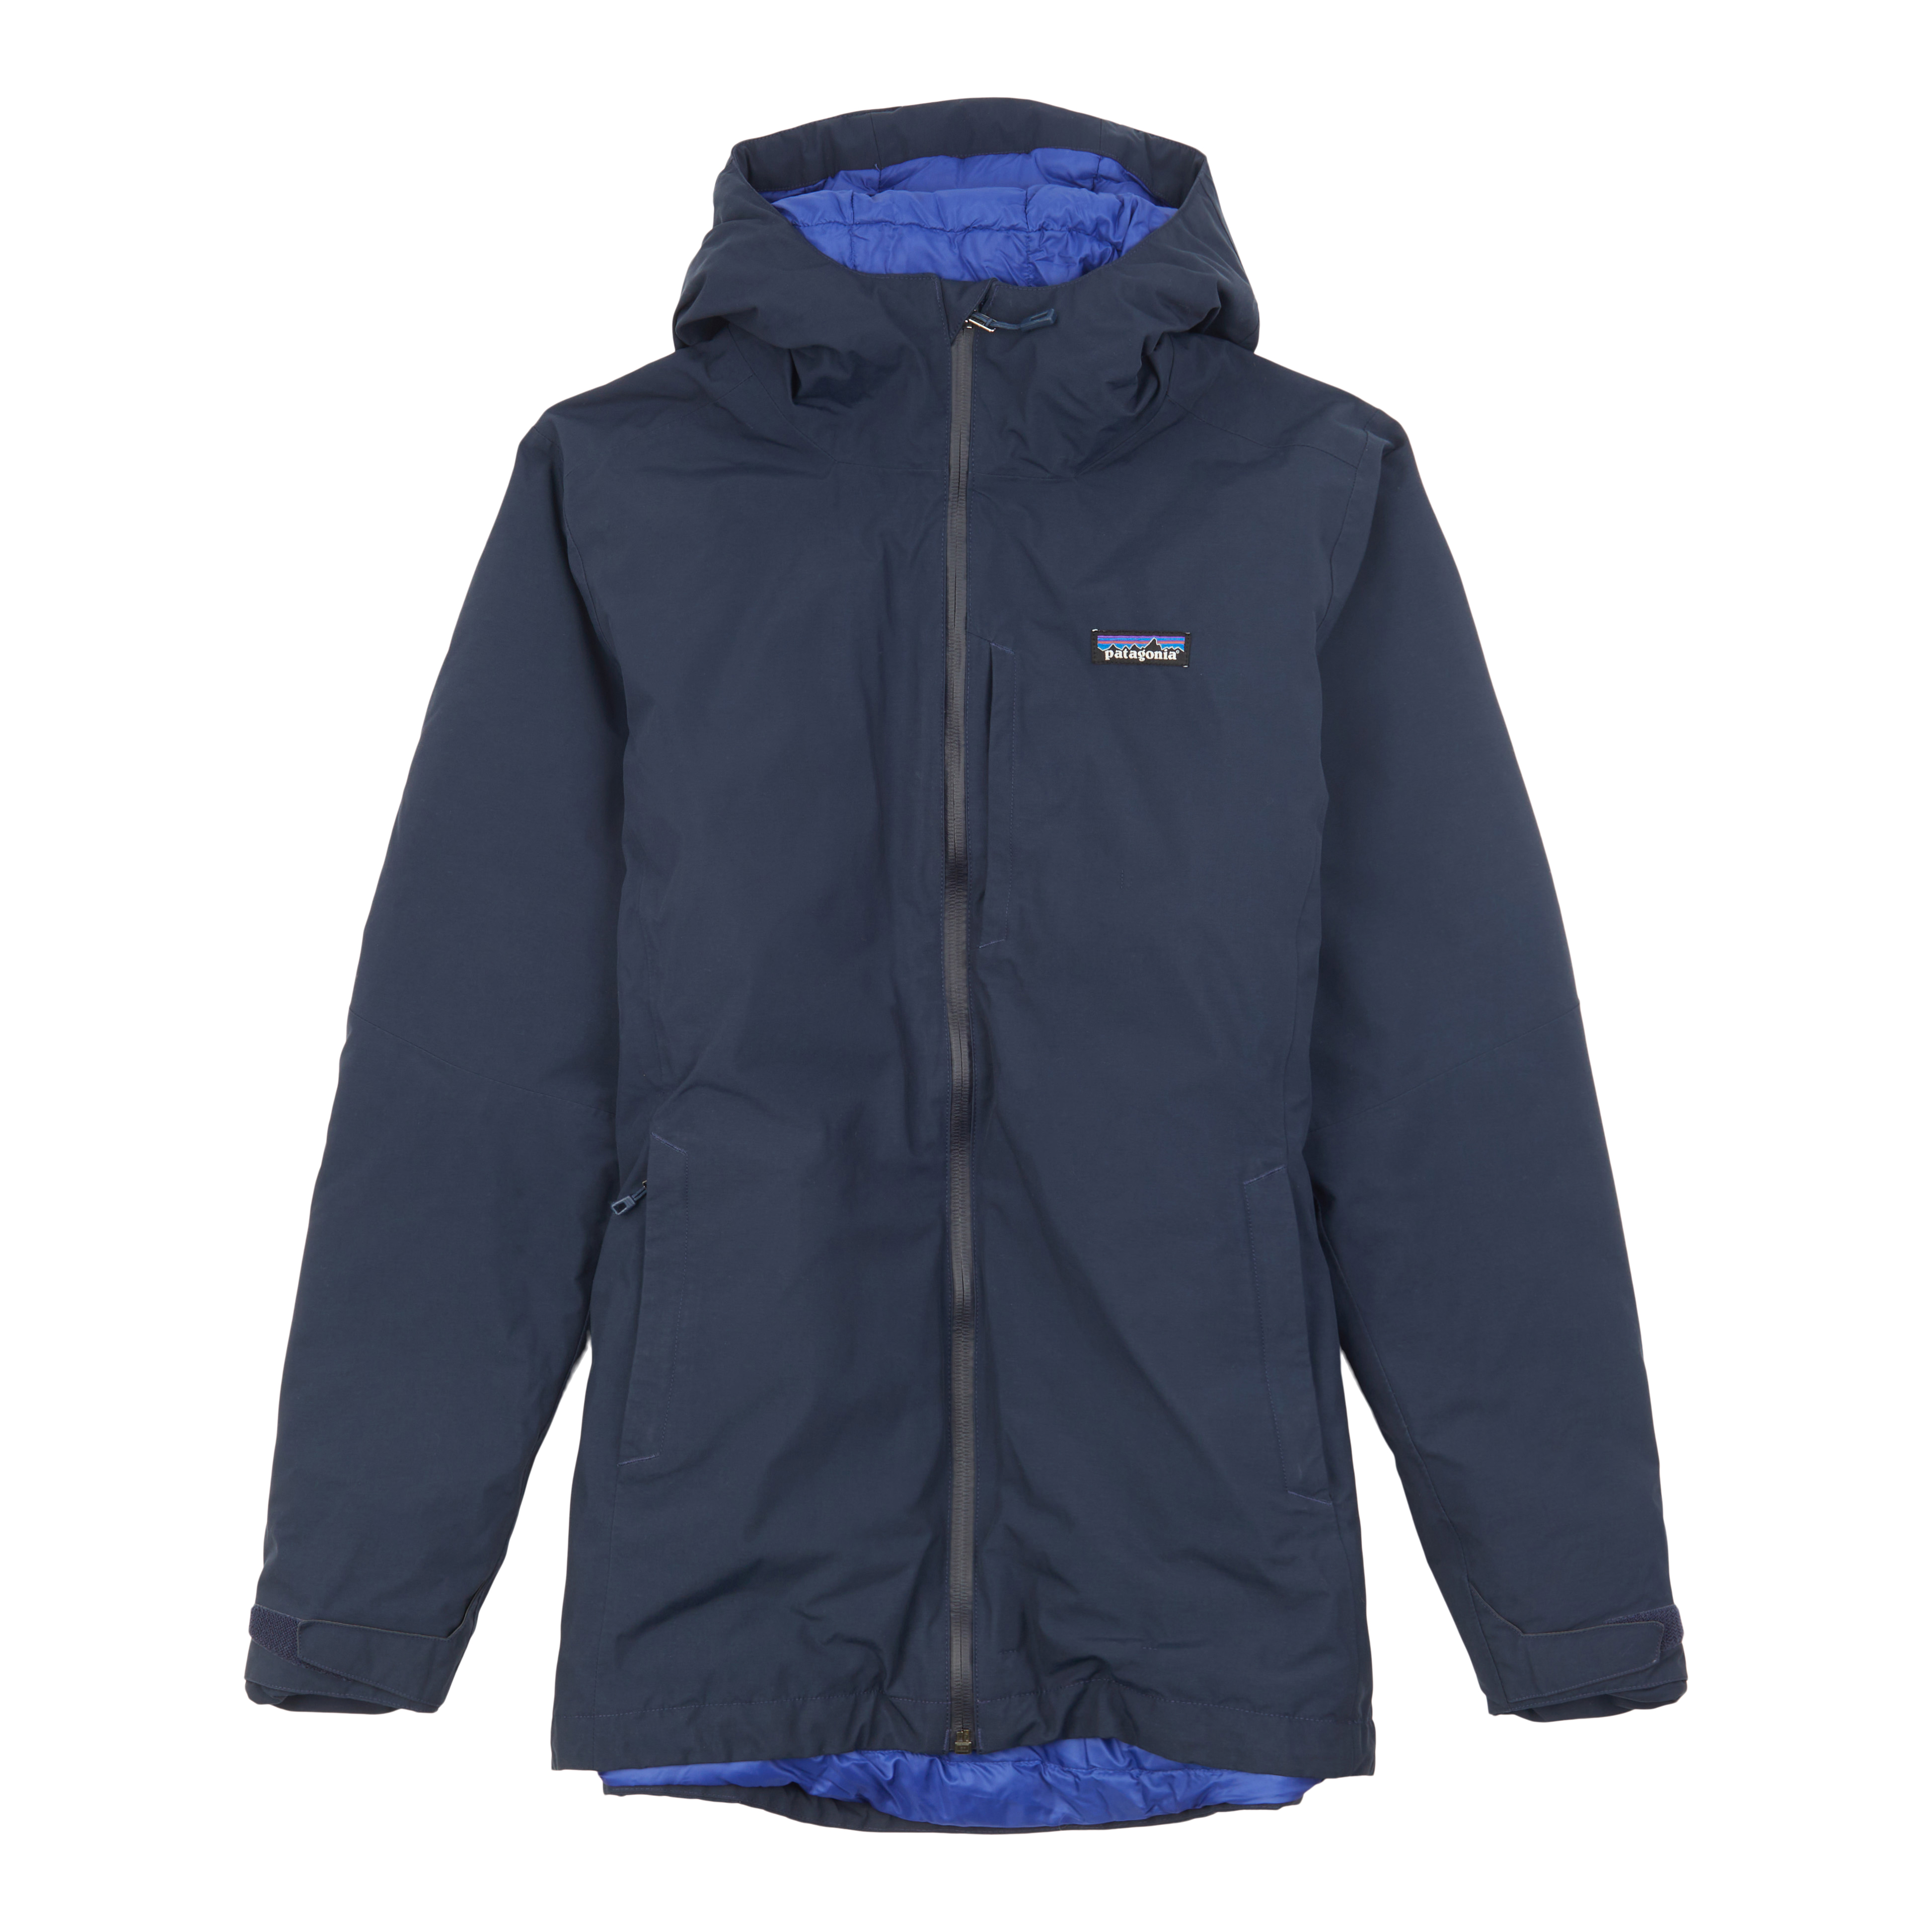 How to Wash a Down Jacket (Patagonia & Others) - Paisley & Sparrow